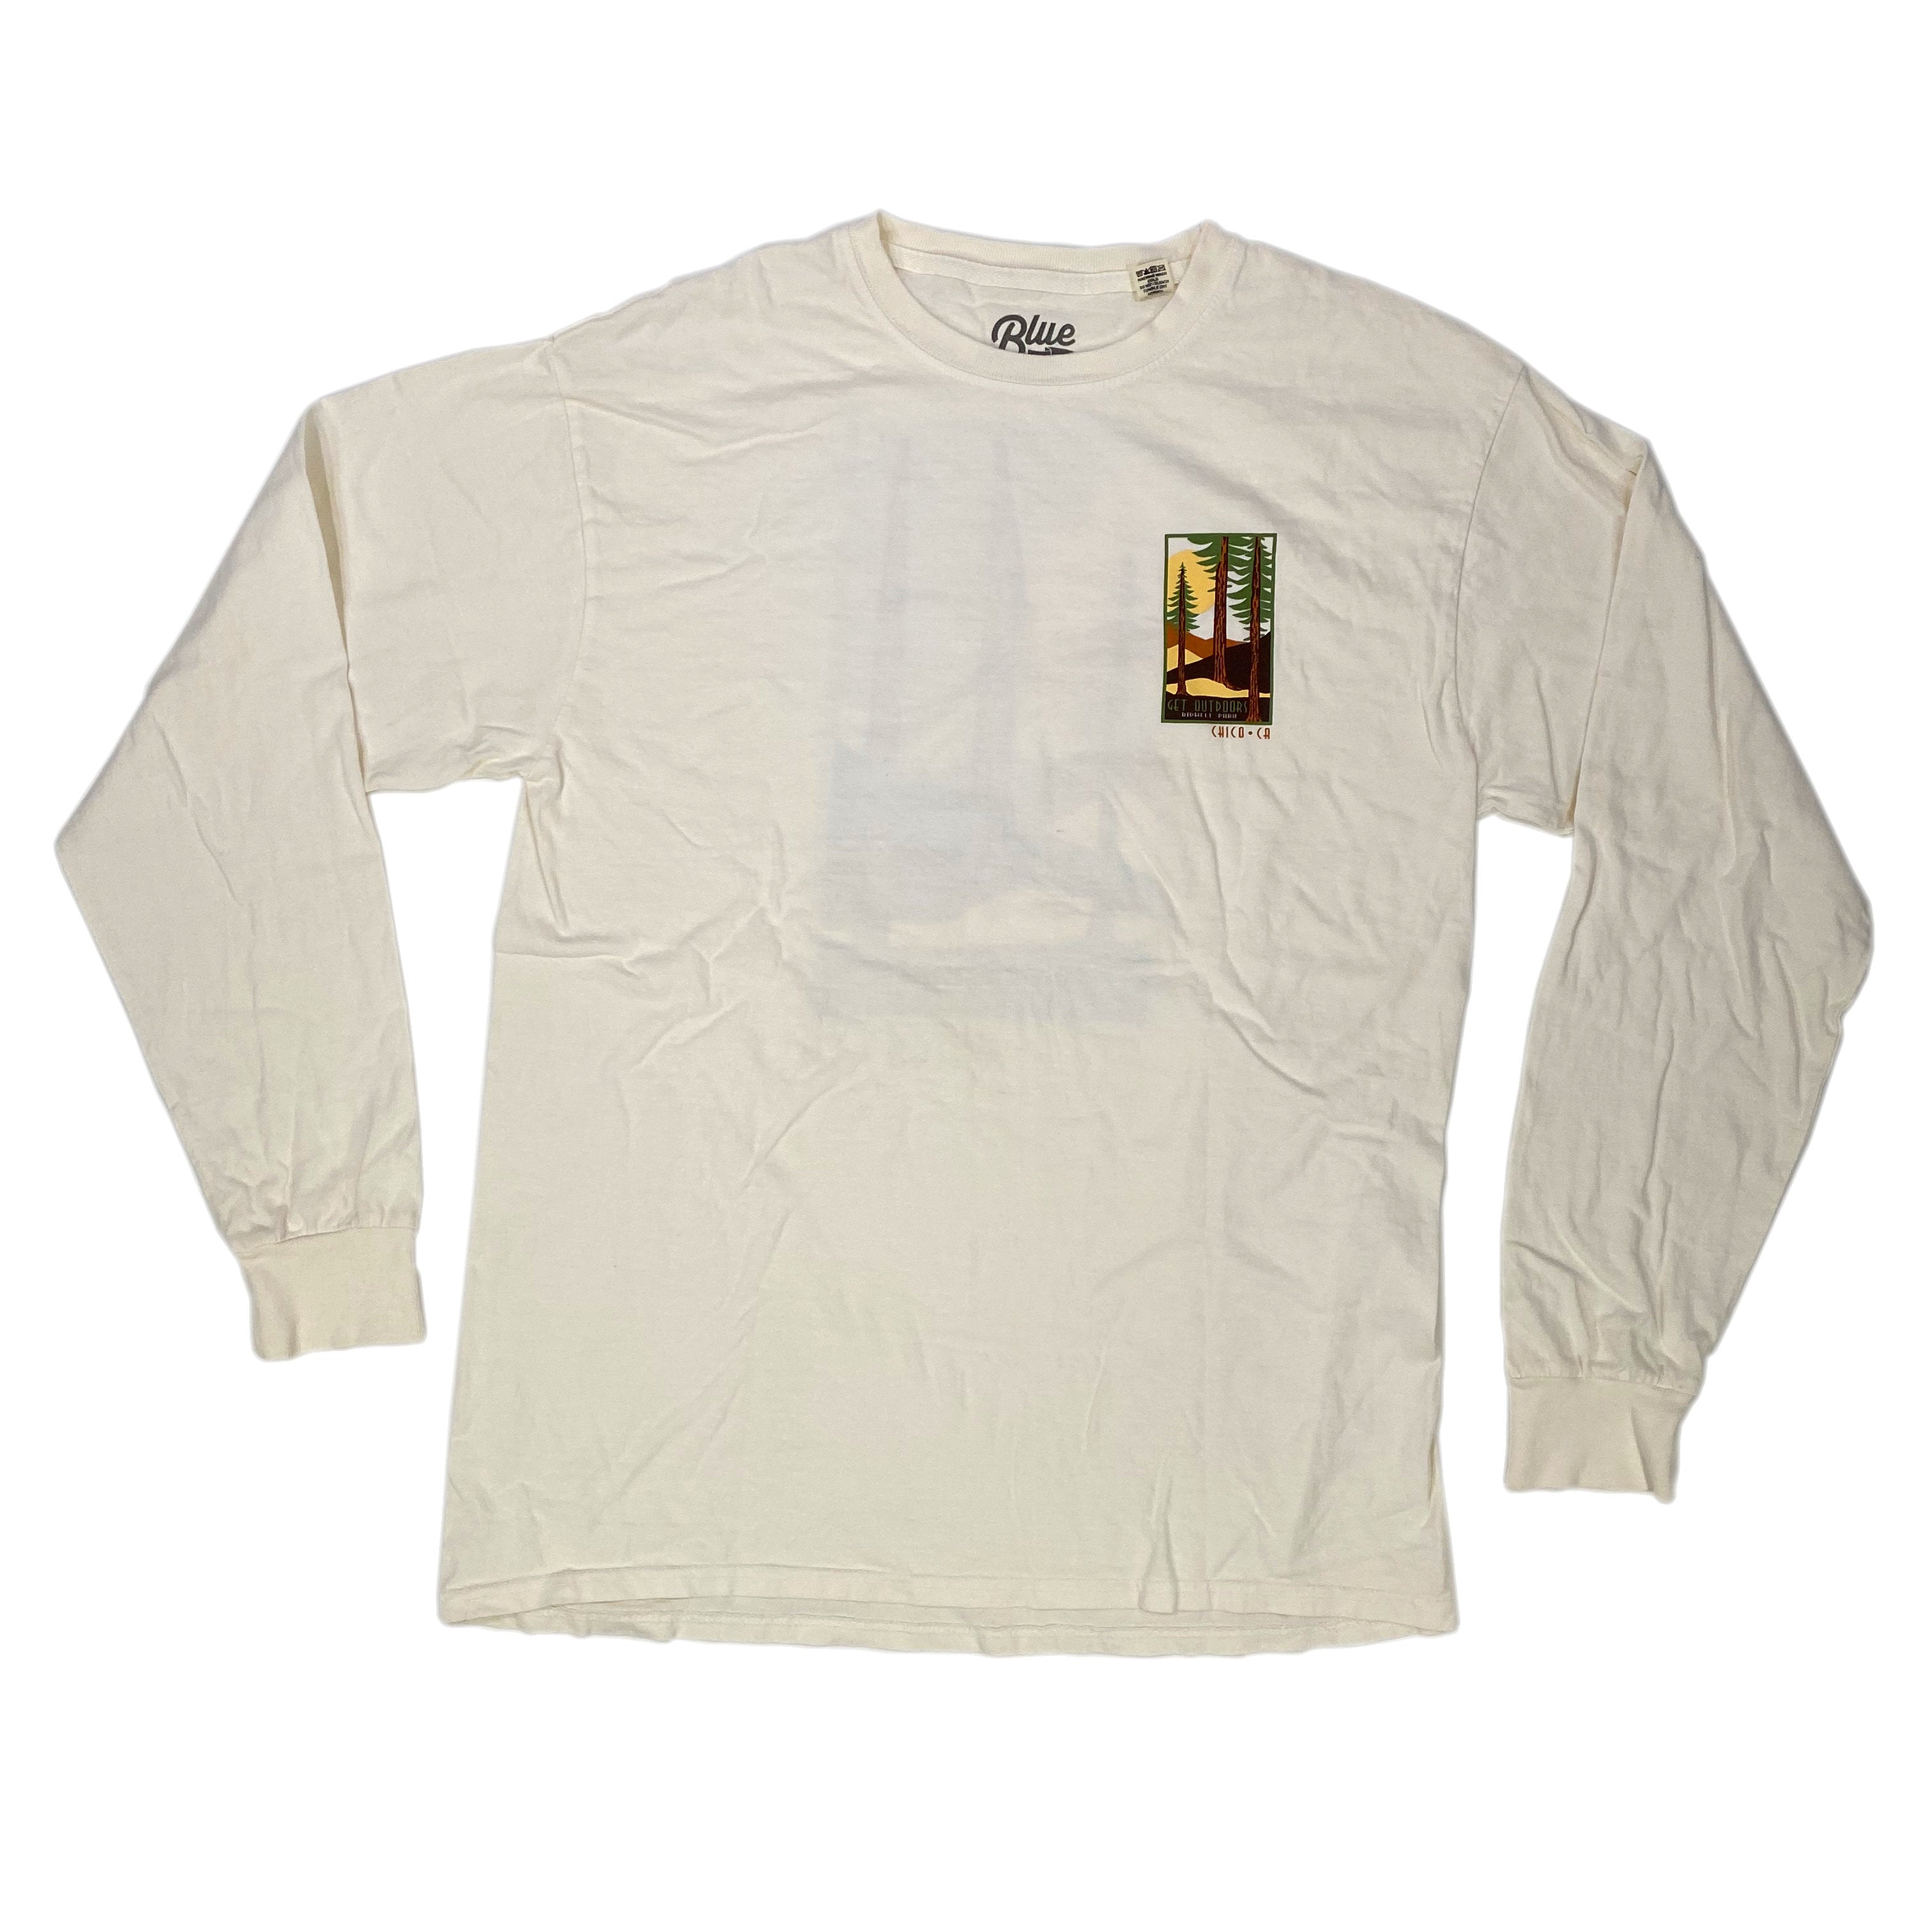 After Point Pine - Long Sleeve Chico T-Shirt IVORY S  BM8PKOLR.1